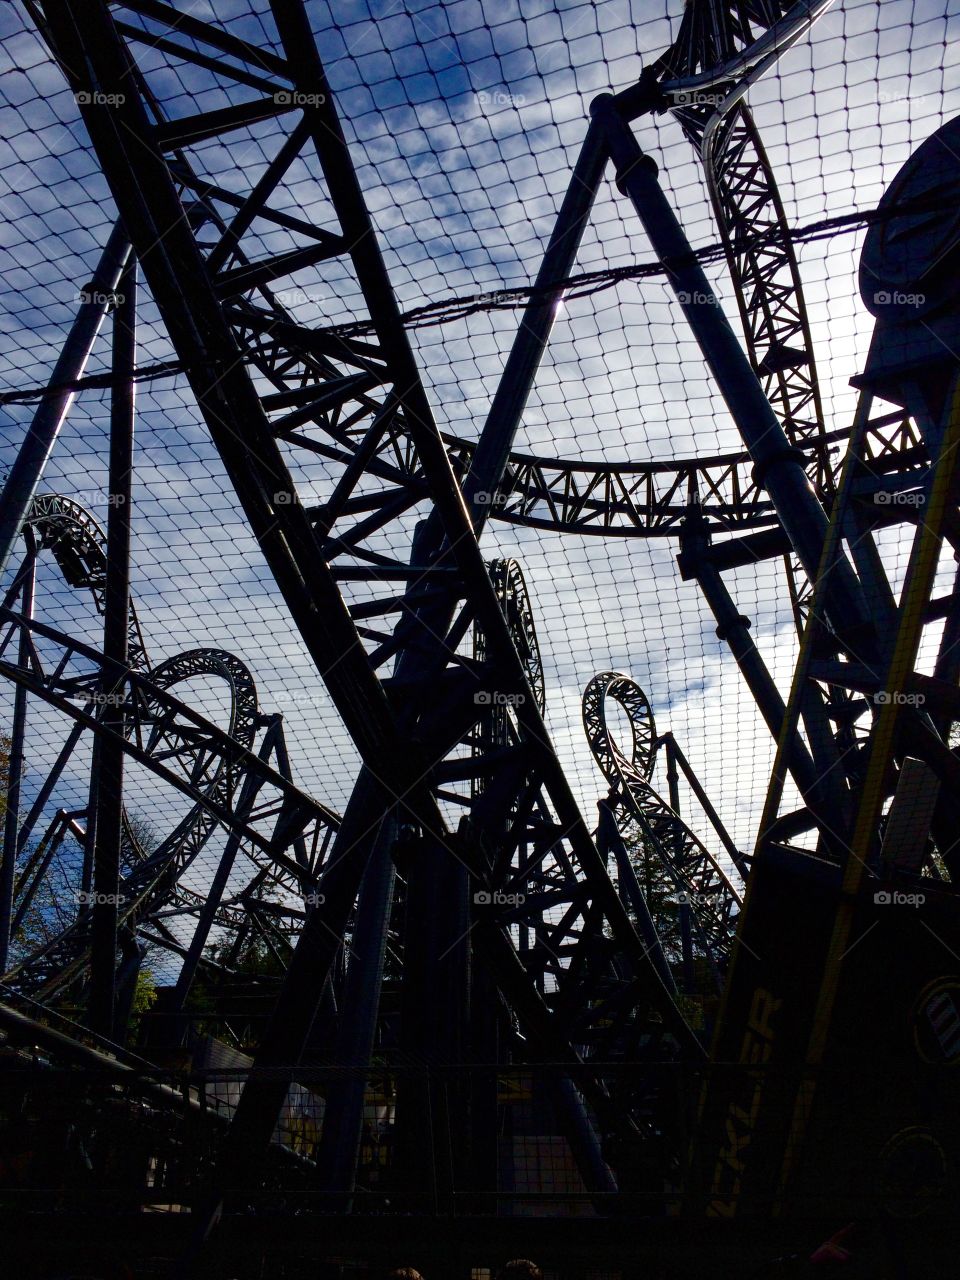 The Smiler rollercoaster Alton Towers Staffordshire, taken while queuing to ride. Beautifully silhouetted. 